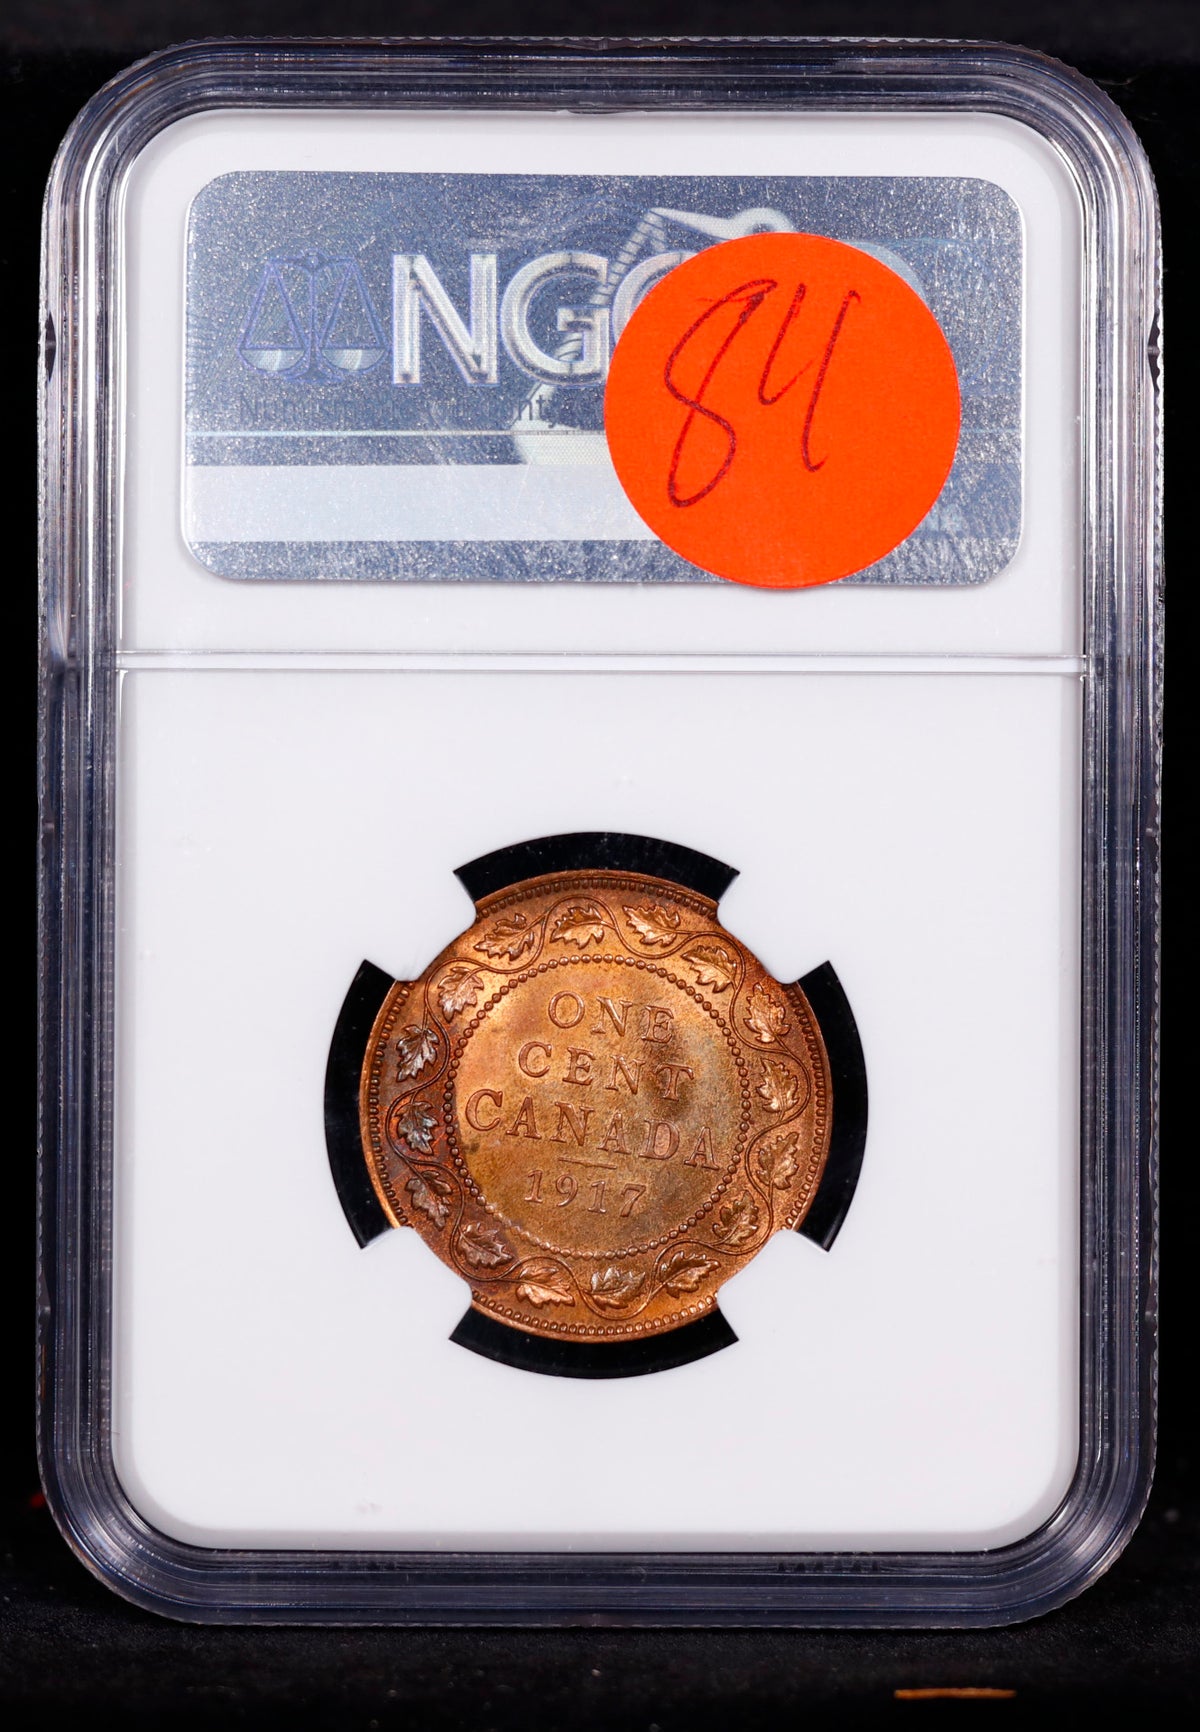 1917 Canada 1c Penny Cent NGC MS63 BN